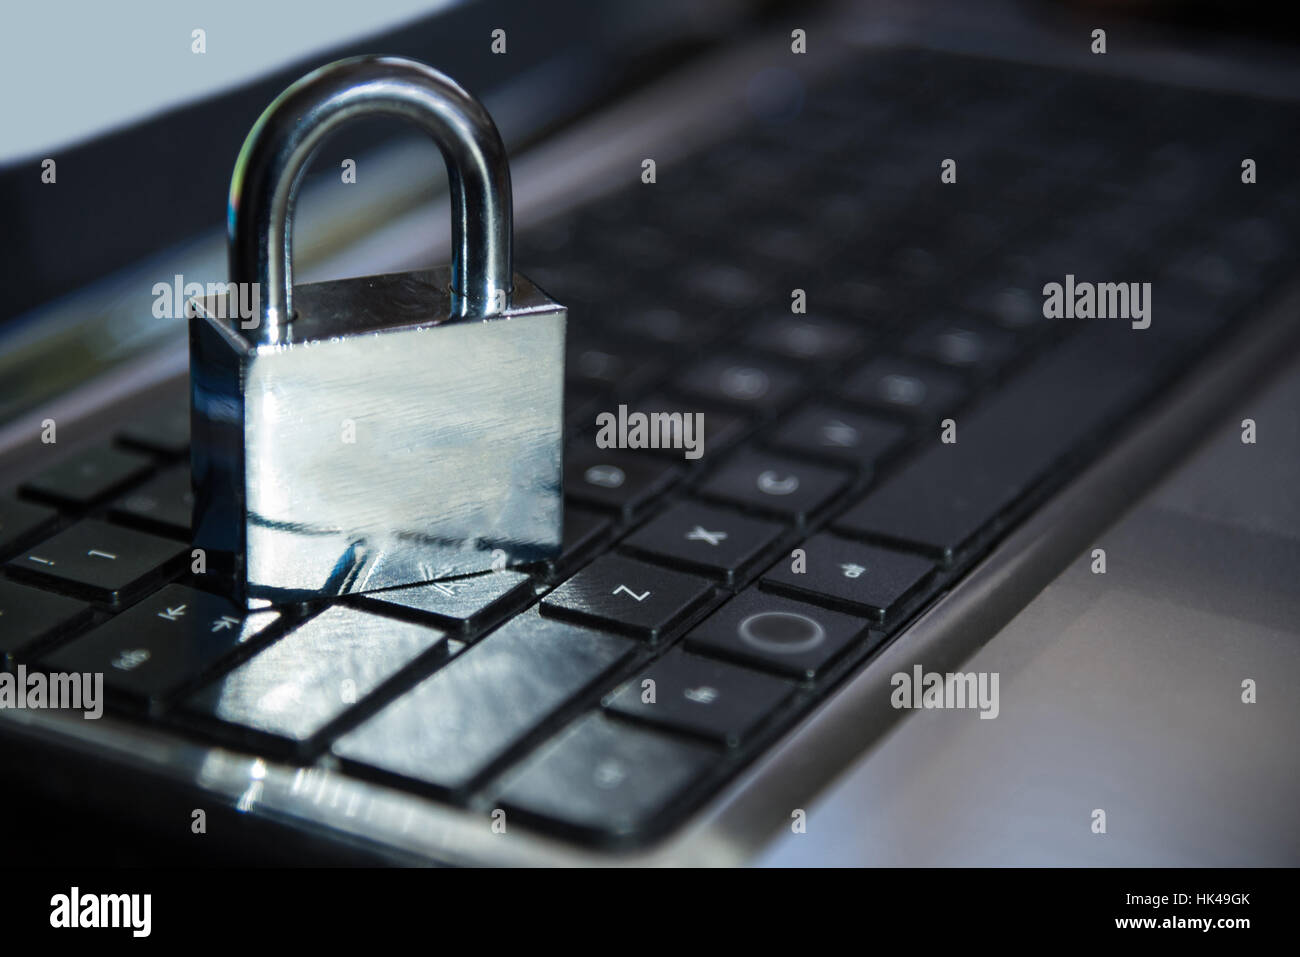 Selective focus on metal lock on keyboard password internet online data privacy information protection security concept in dark tone low key Stock Photo